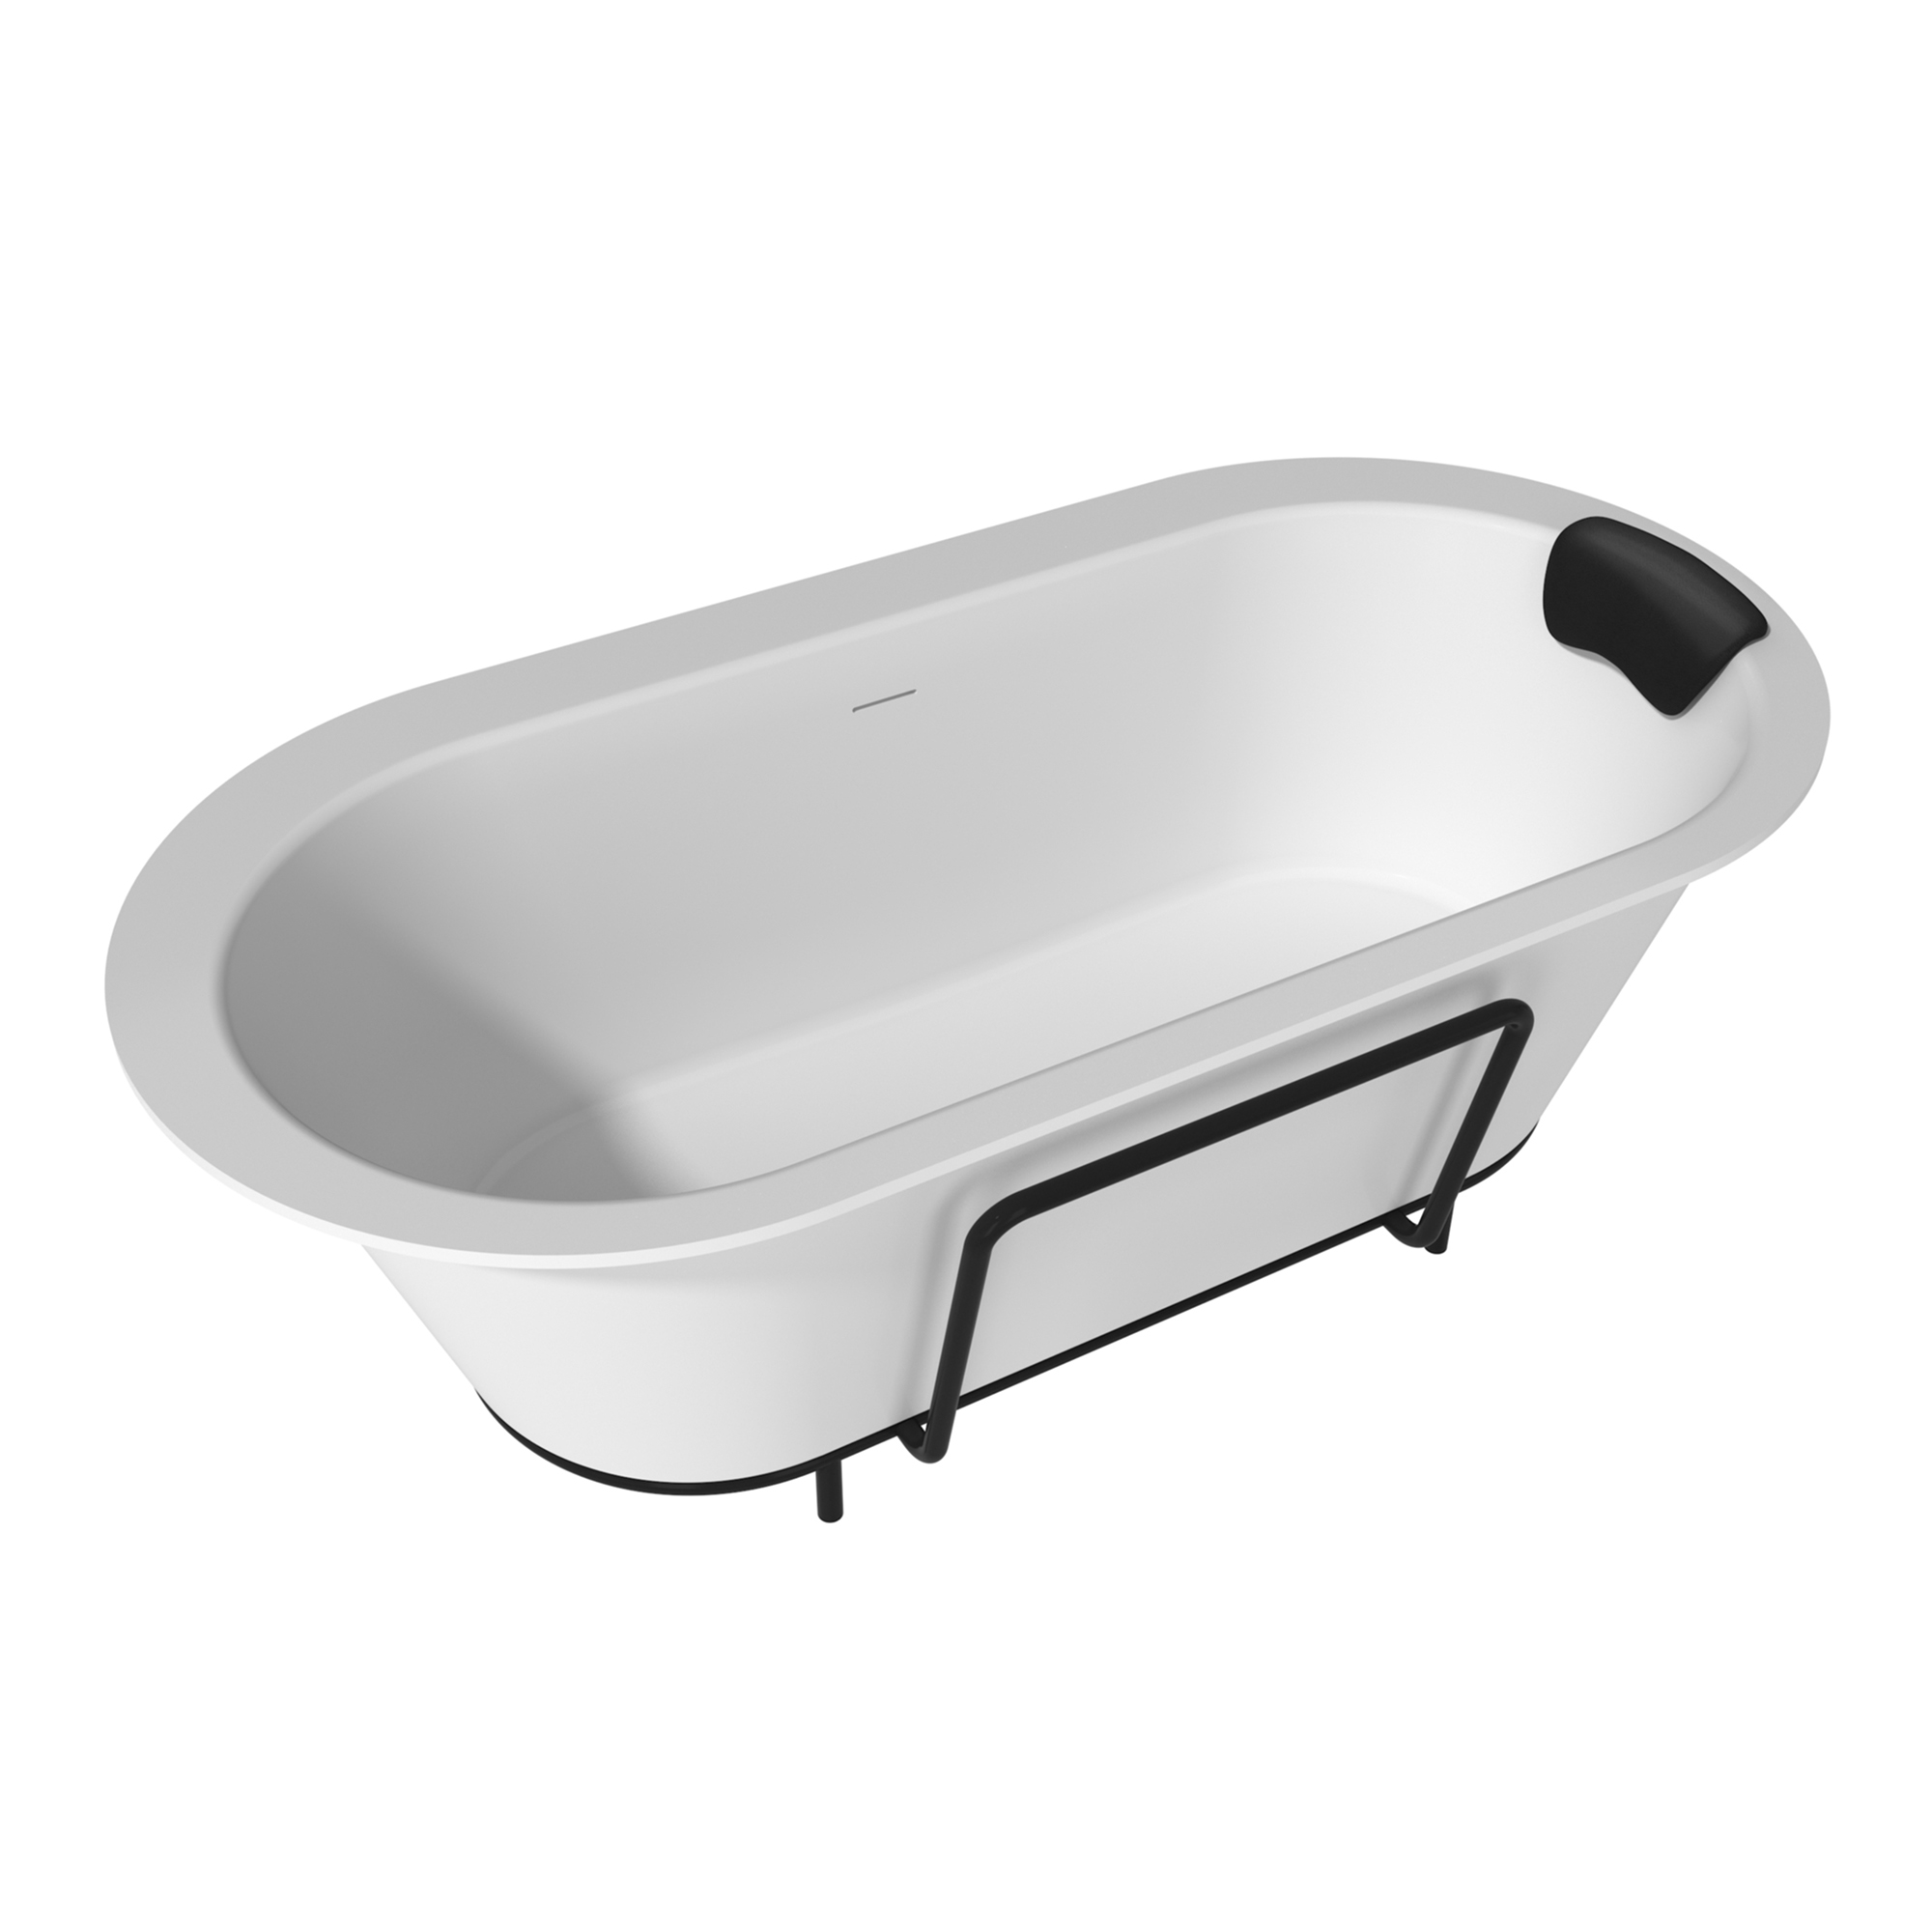 CASAINC 67/71" Stone Resin Adult Freestanding Soaking Tub with Cushions, Rectangular Shaped Solid Surface Bathtubs, Matte White 